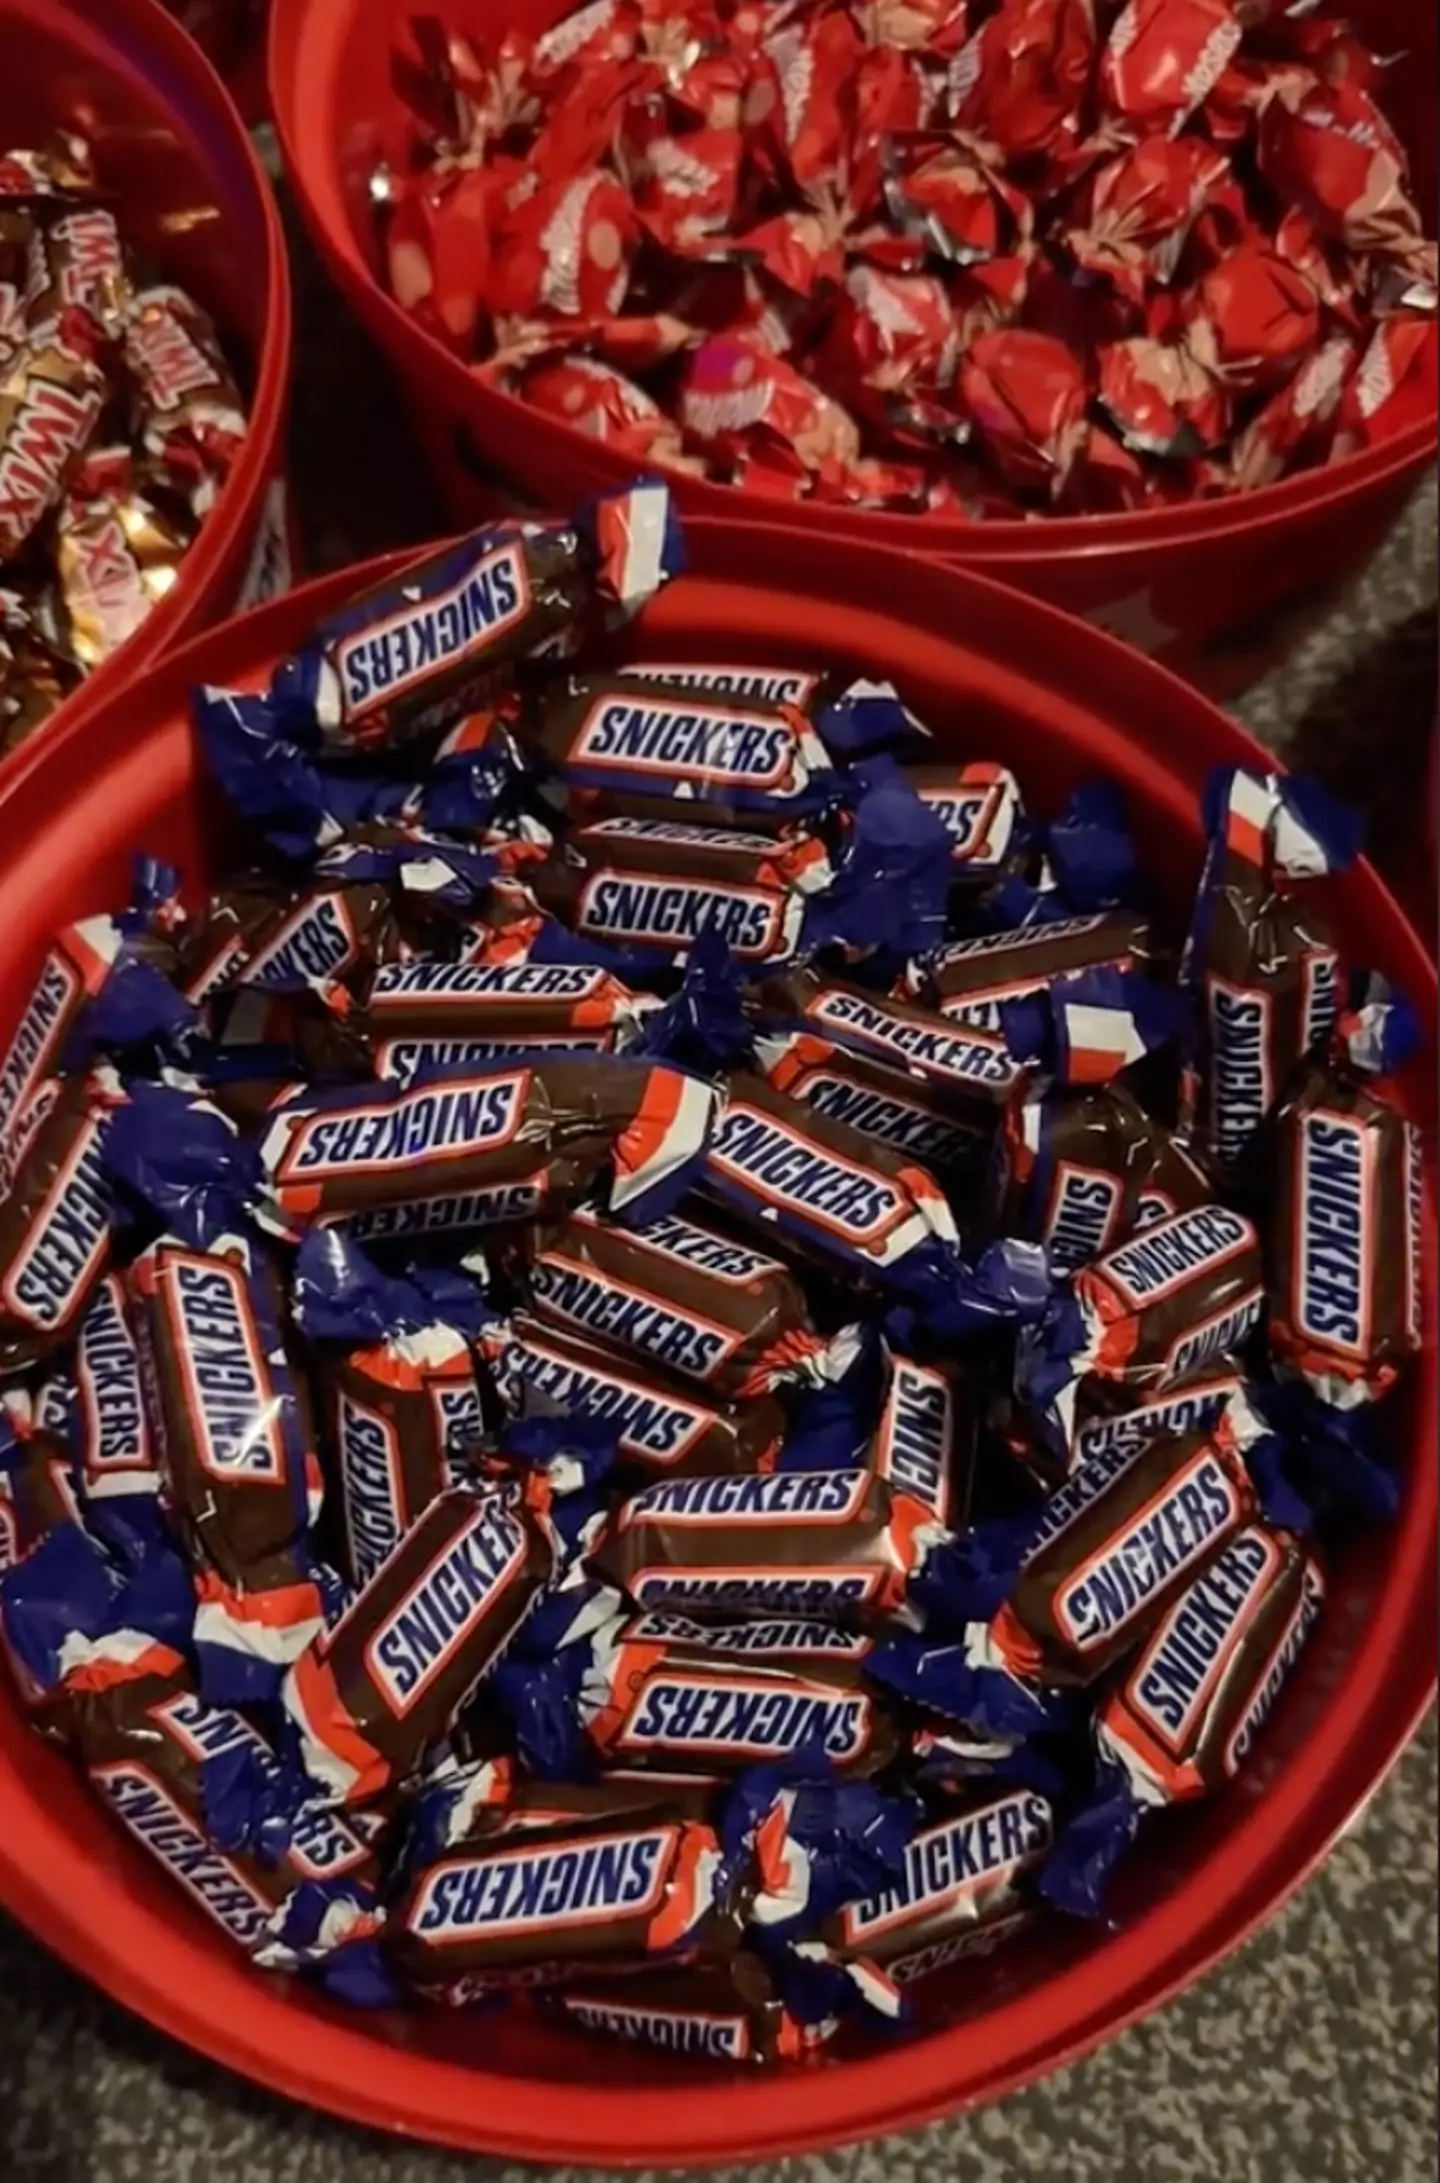 It turns out Snickers are the king of the tub.